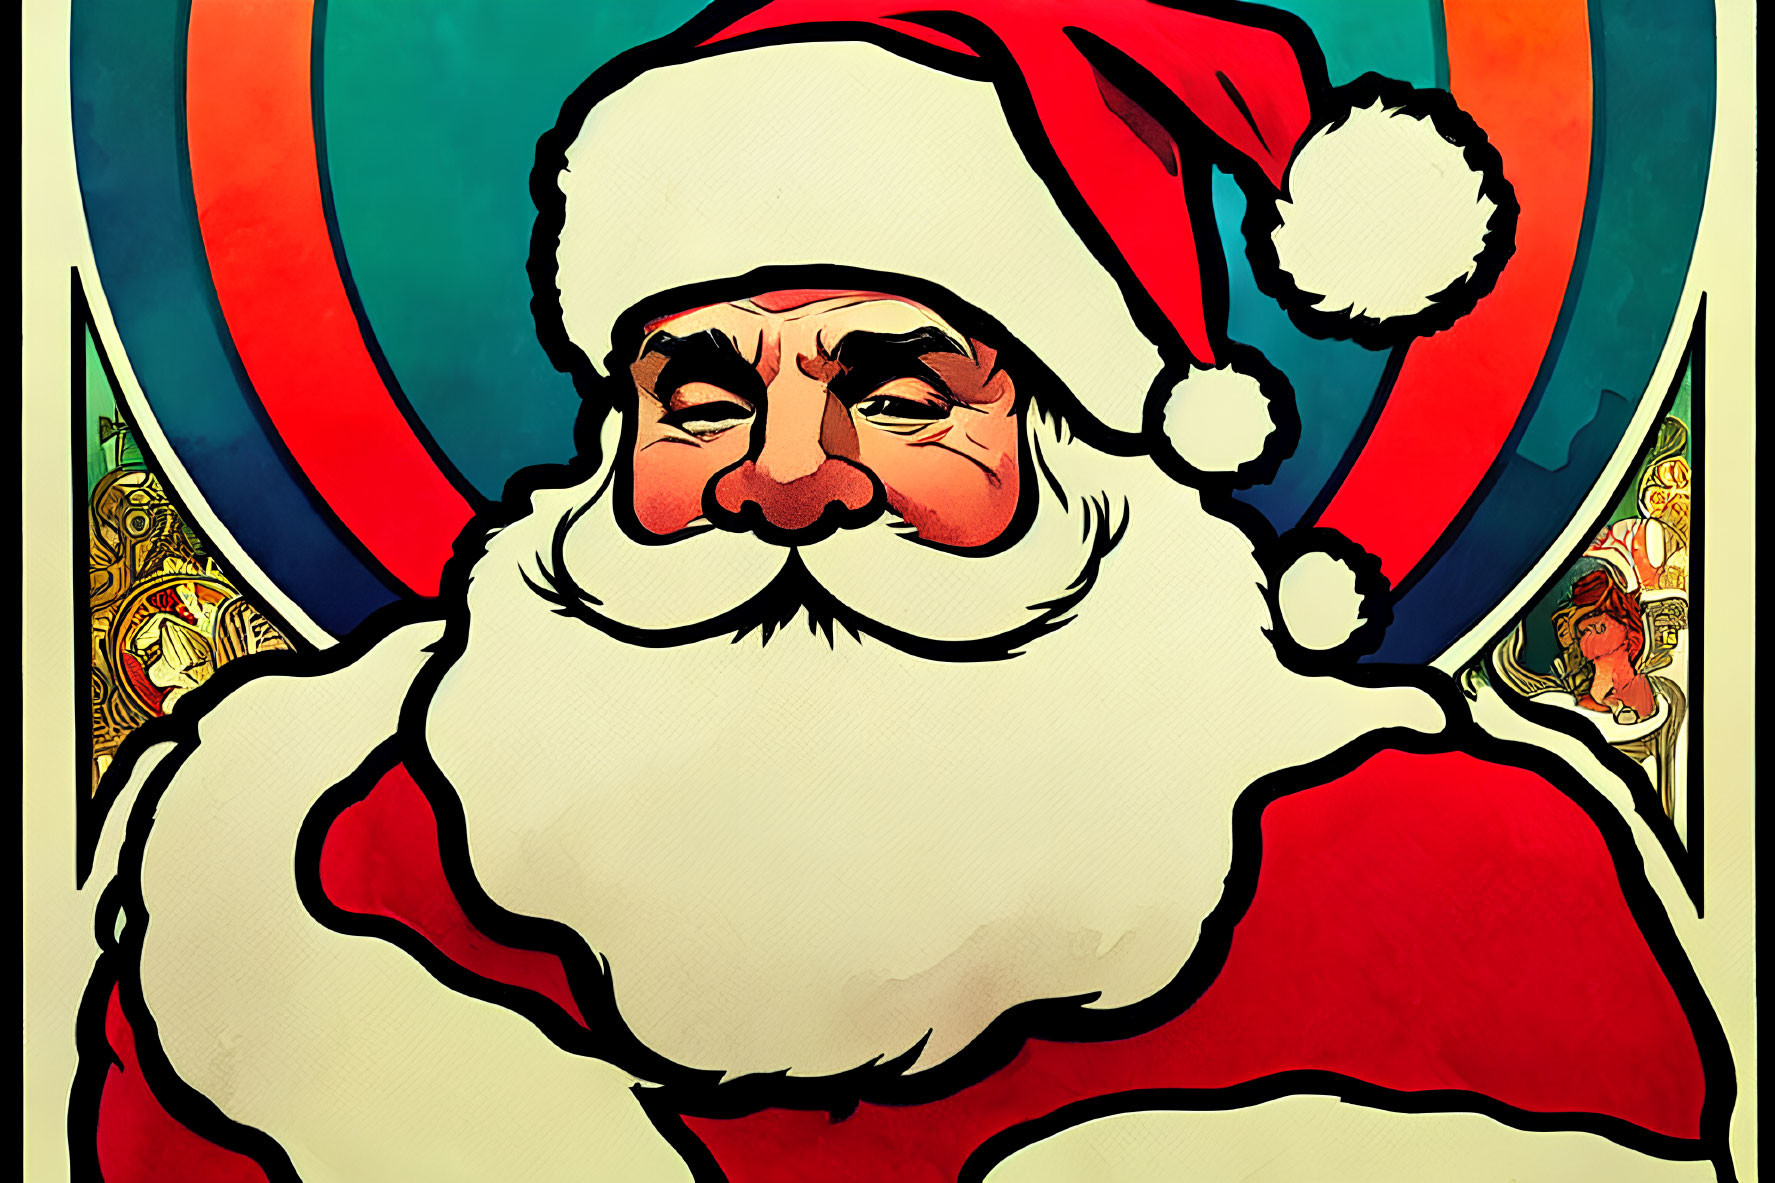 Vibrant Santa Claus Illustration with Red Hat and Suit